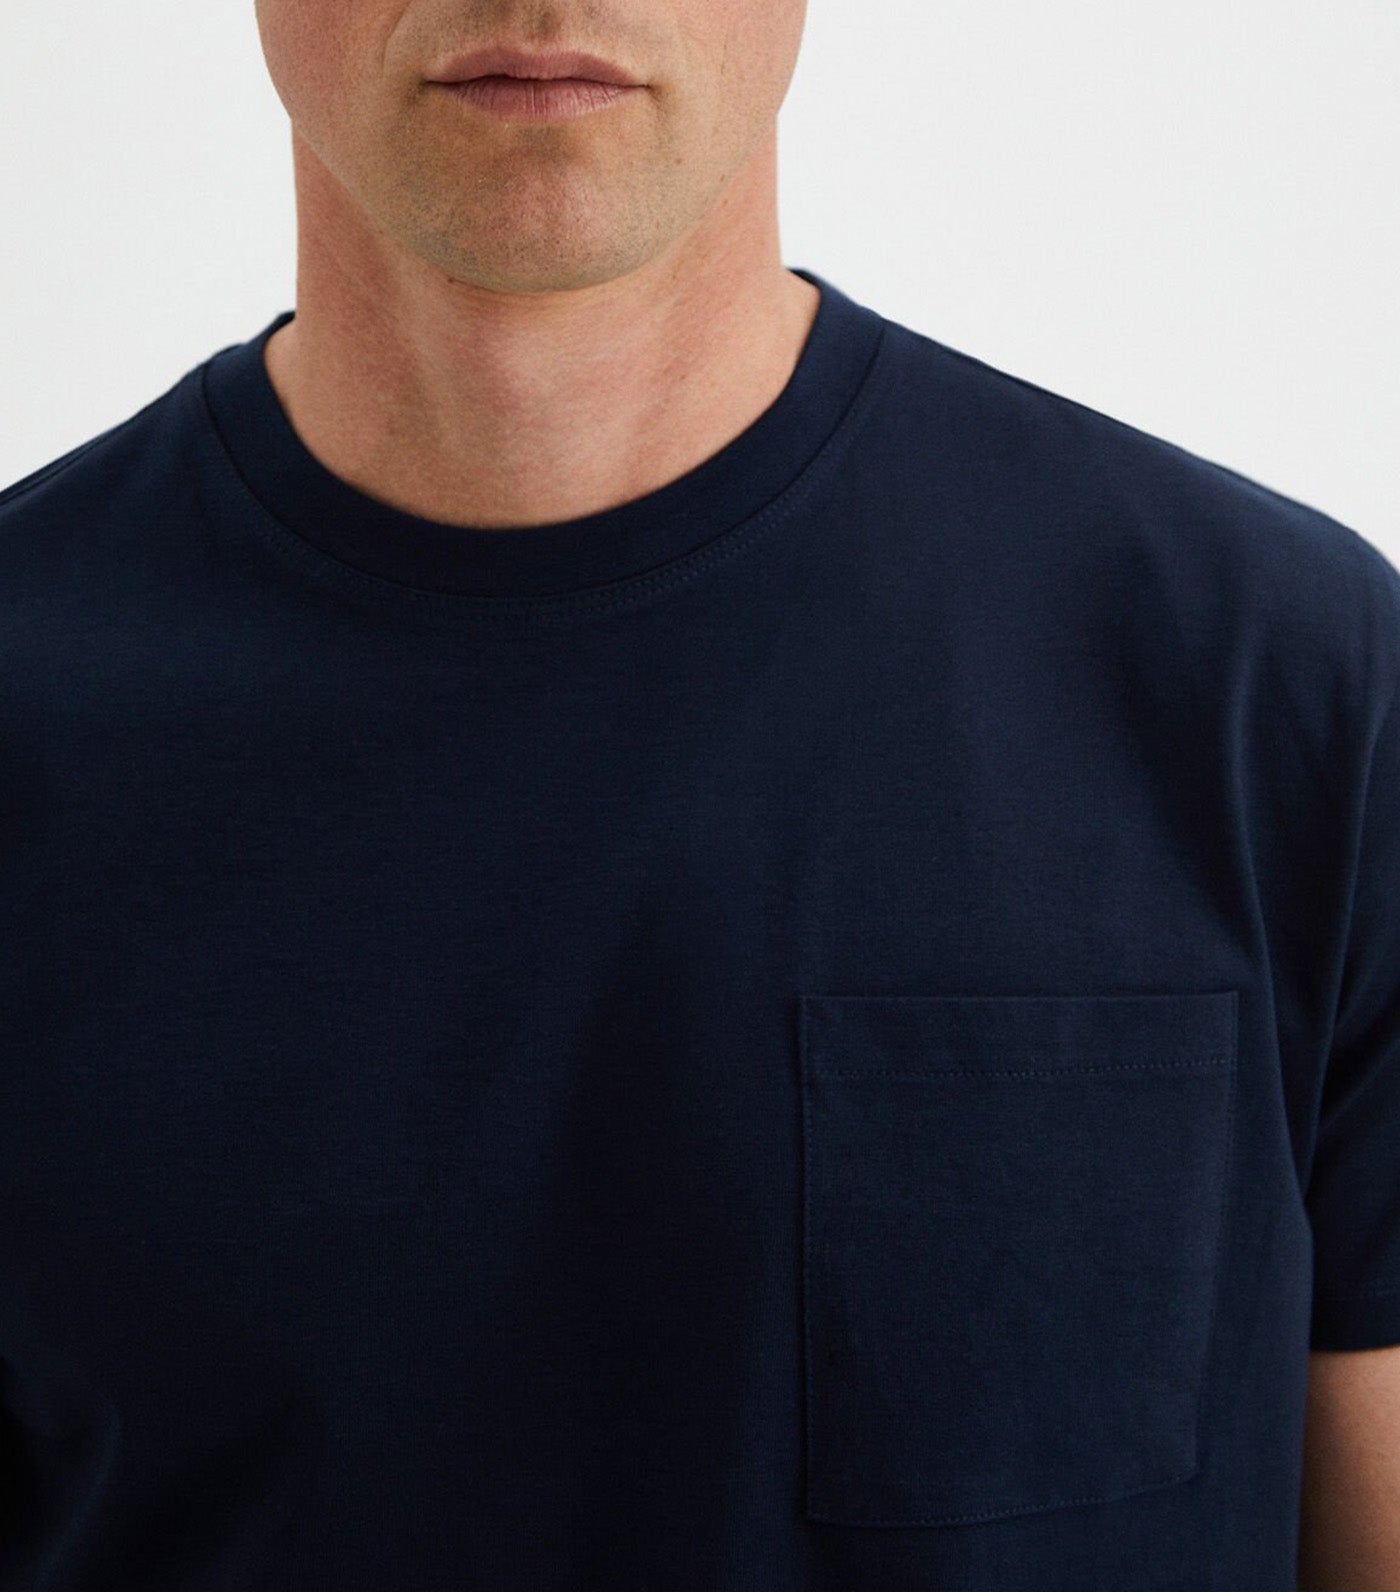 Crew Neck T-shirt with Pocket Navy